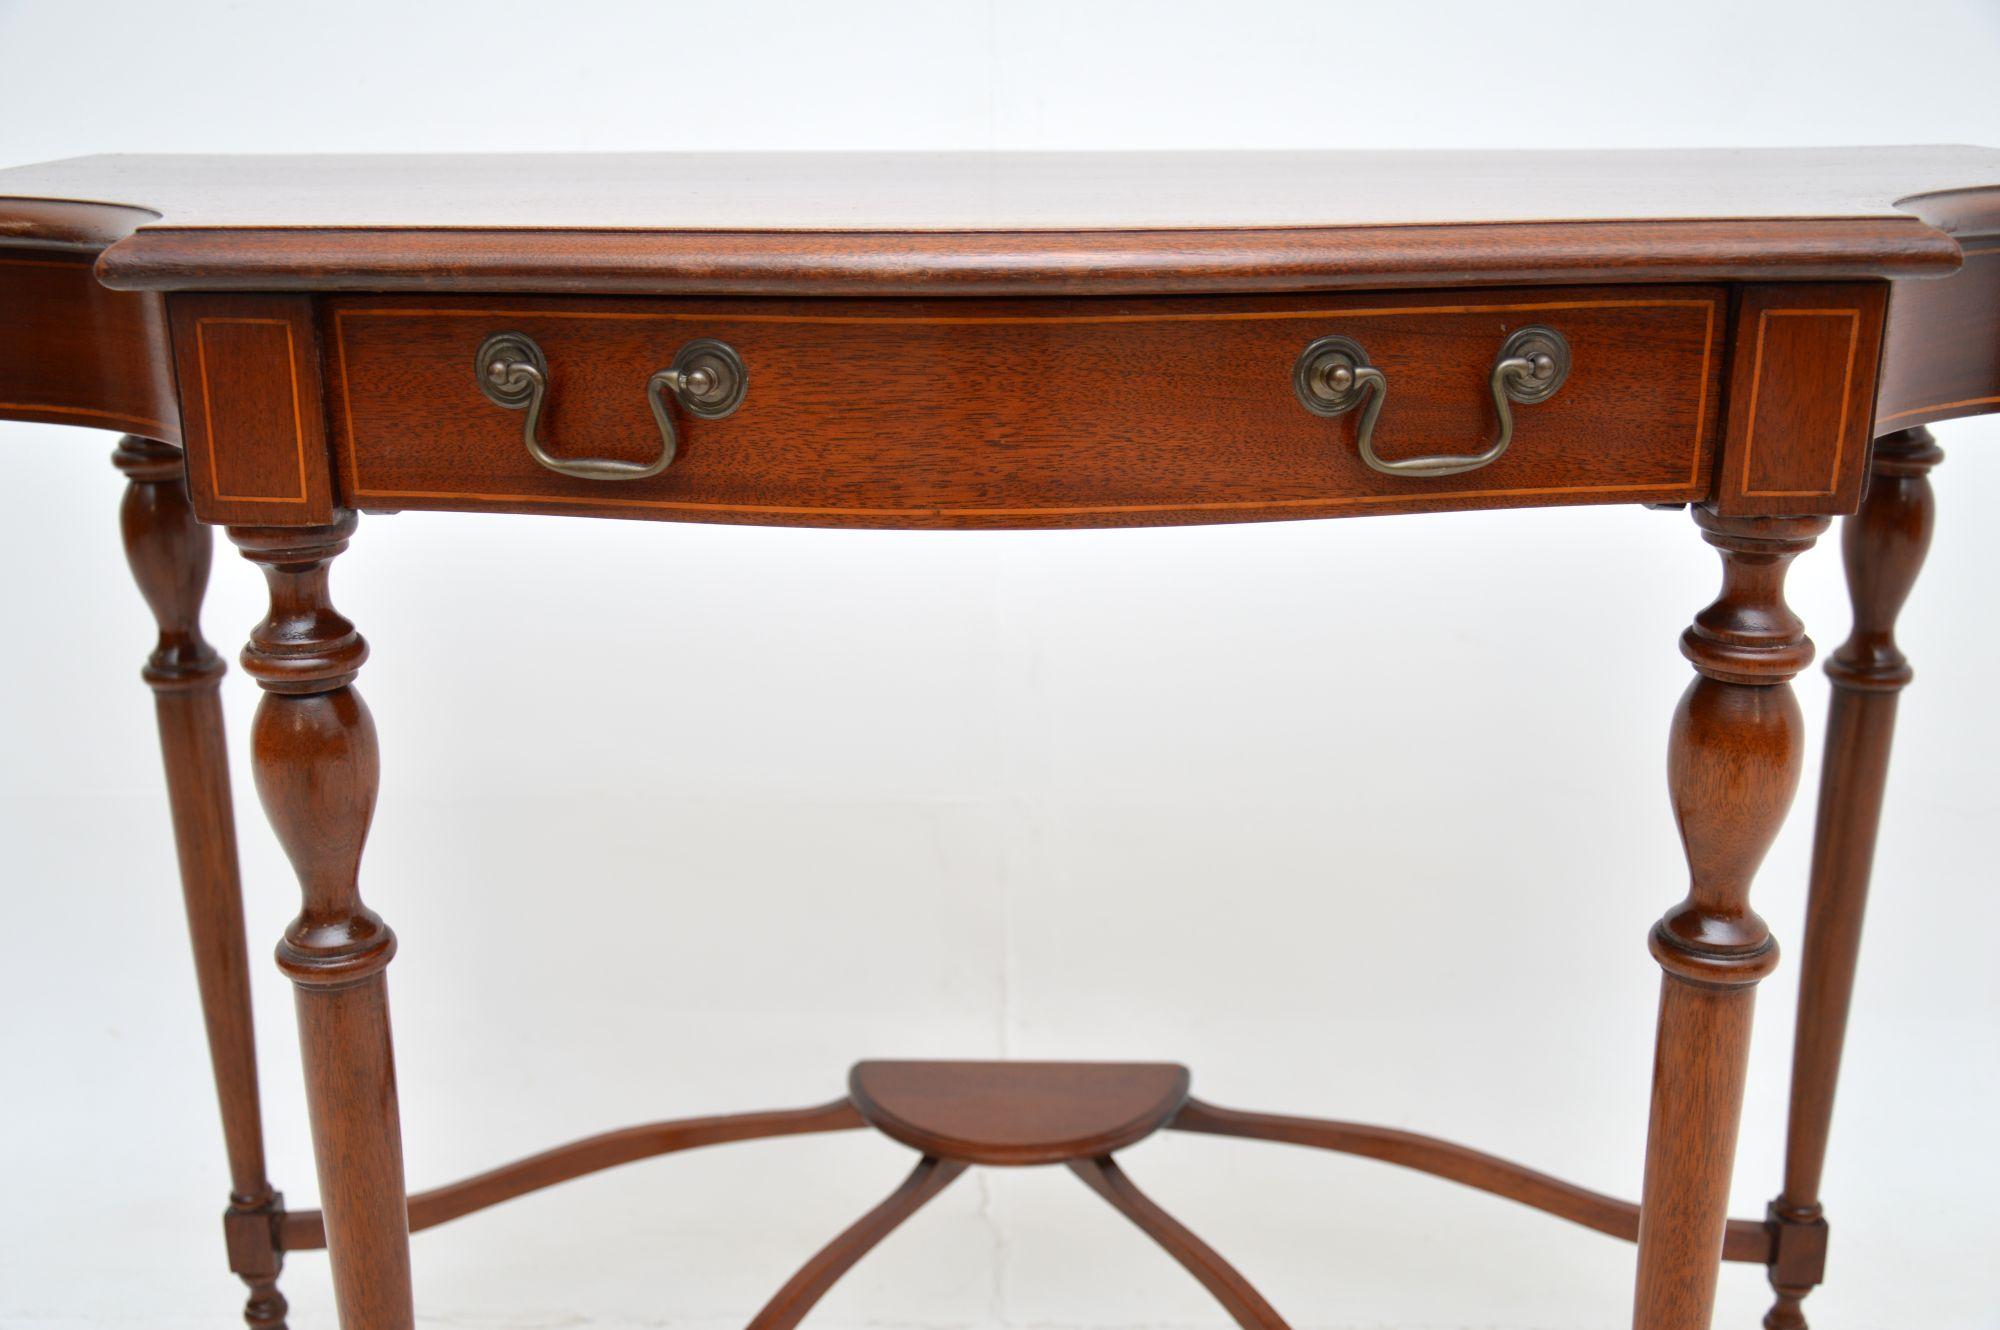 Wood Antique Georgian Style Console Table